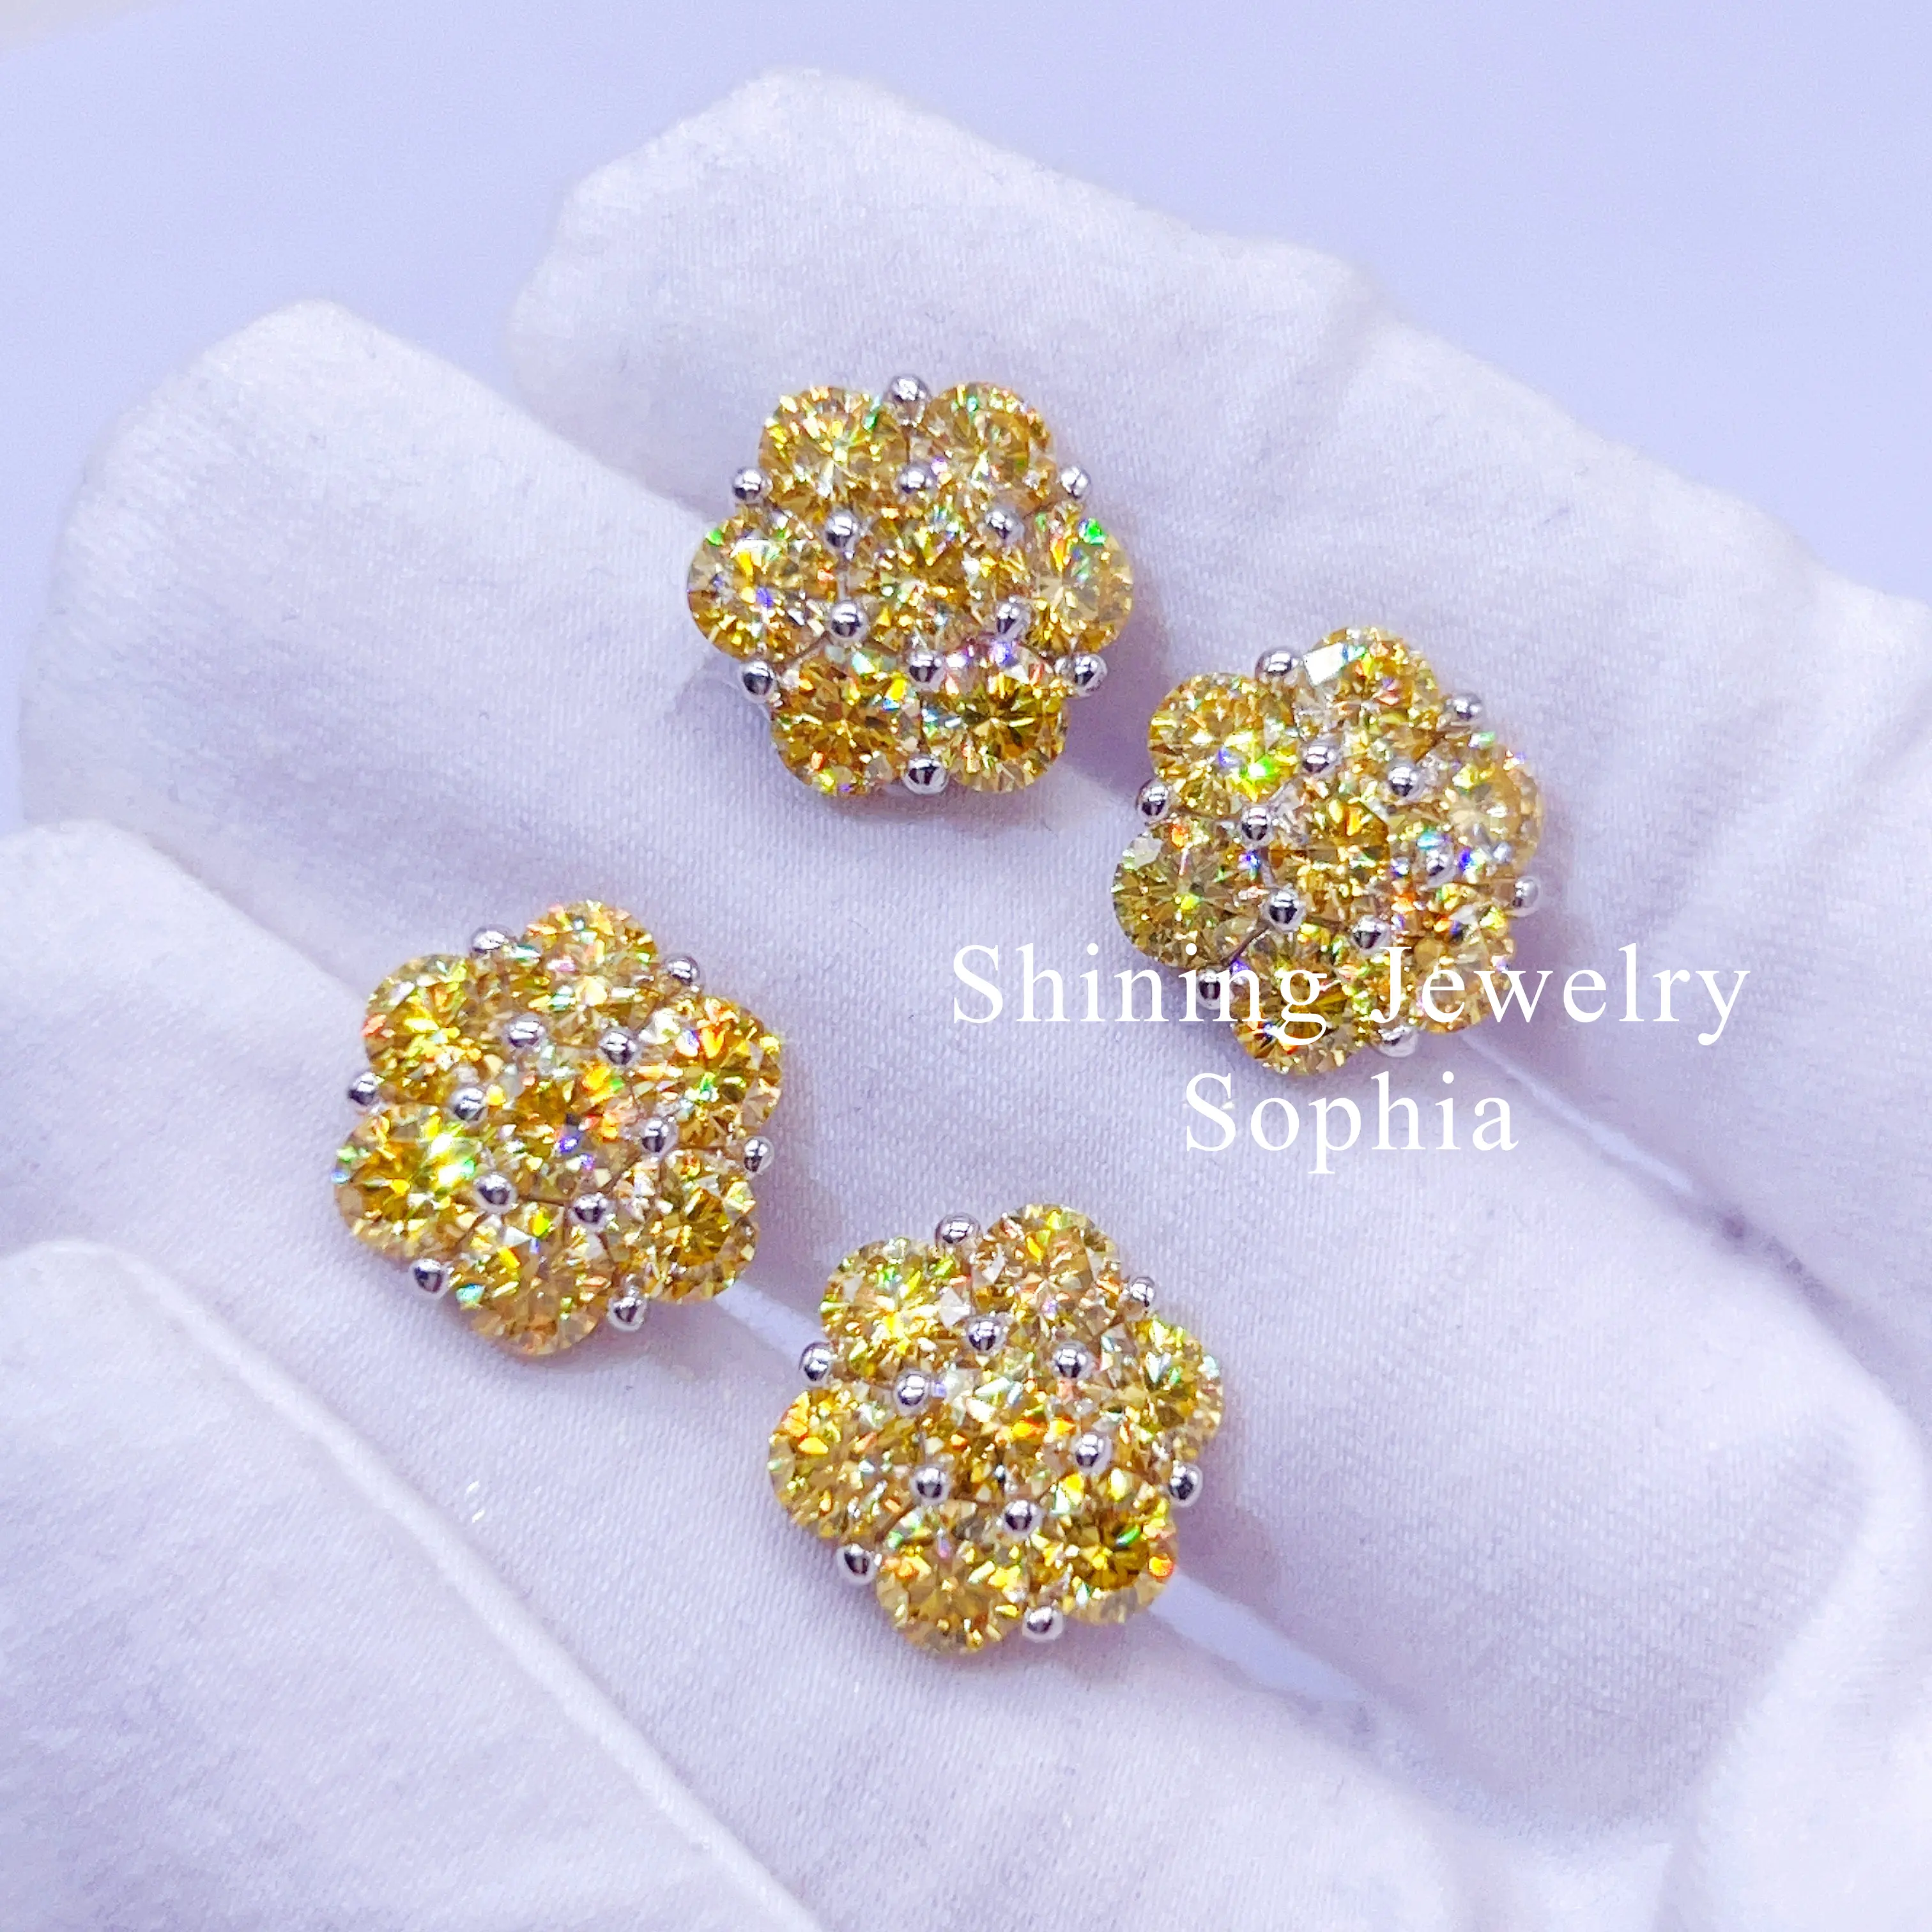 Hip hop men jewelry S925 Sterling Silver Gold Plated Micro Pave yellow colored moissanite stud earring